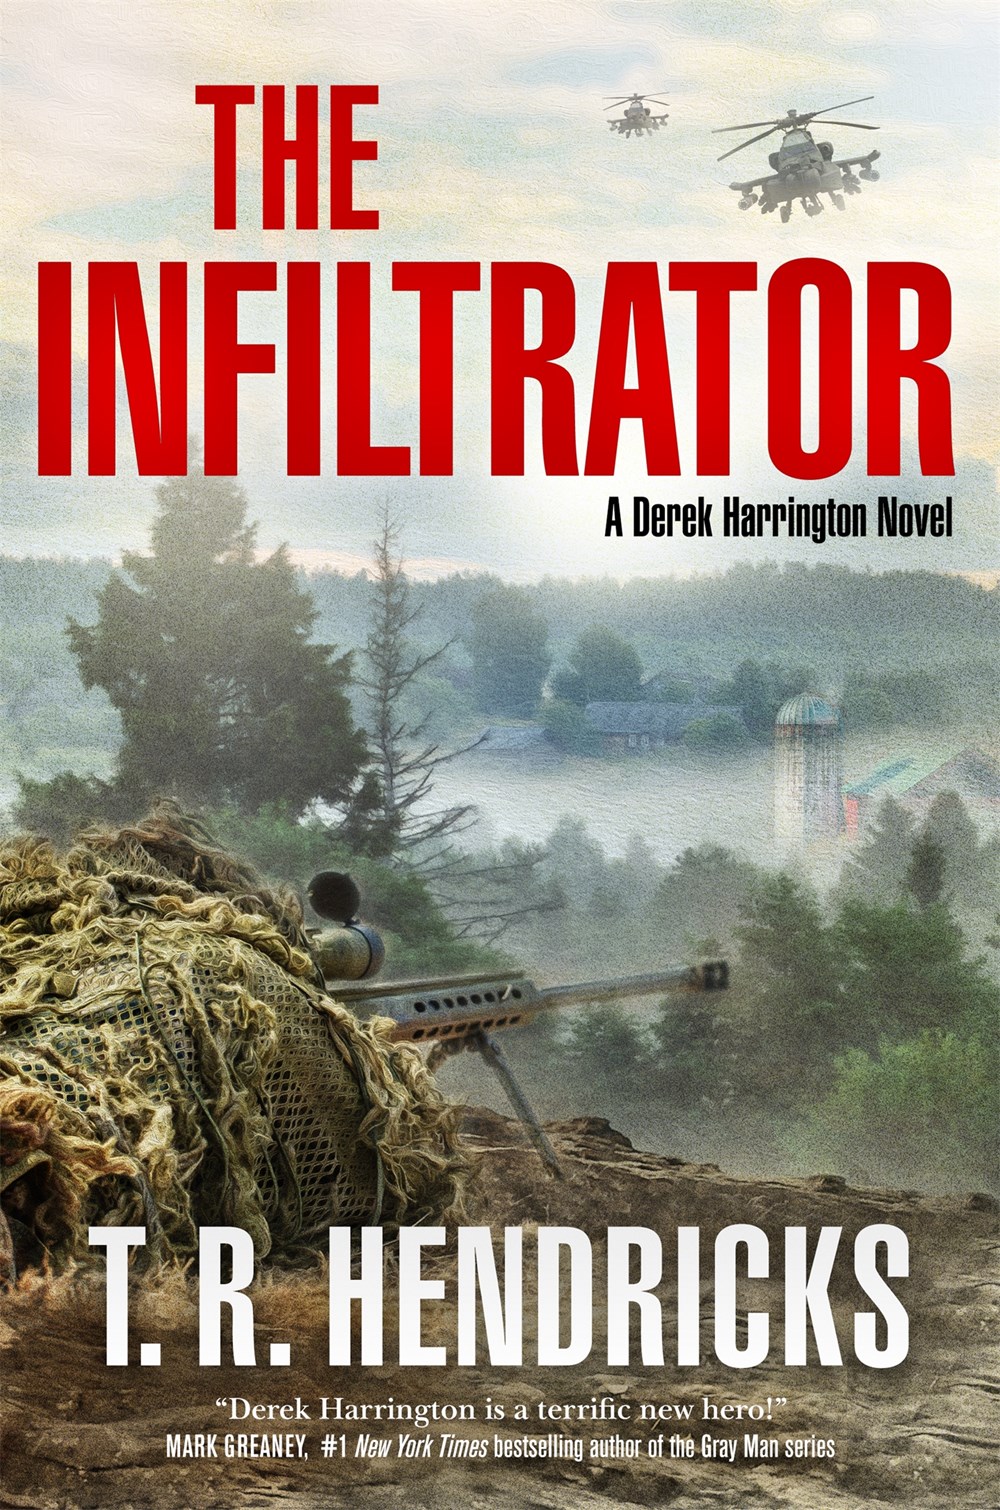 The Infiltrator by T. R. Hendricks